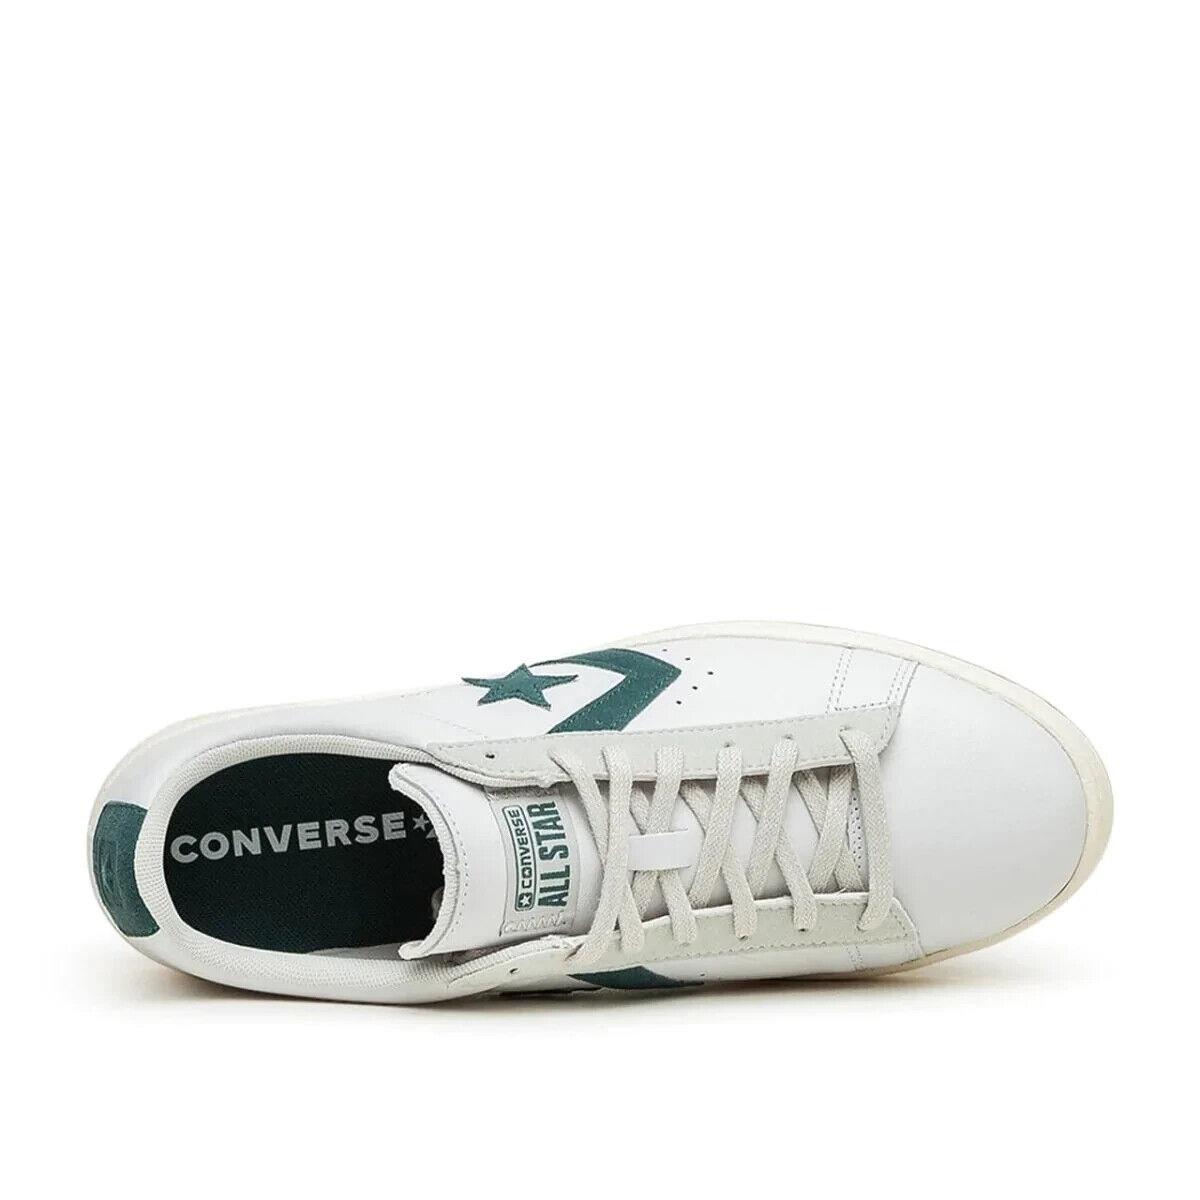 Converse shoes Pro Leather - White 3